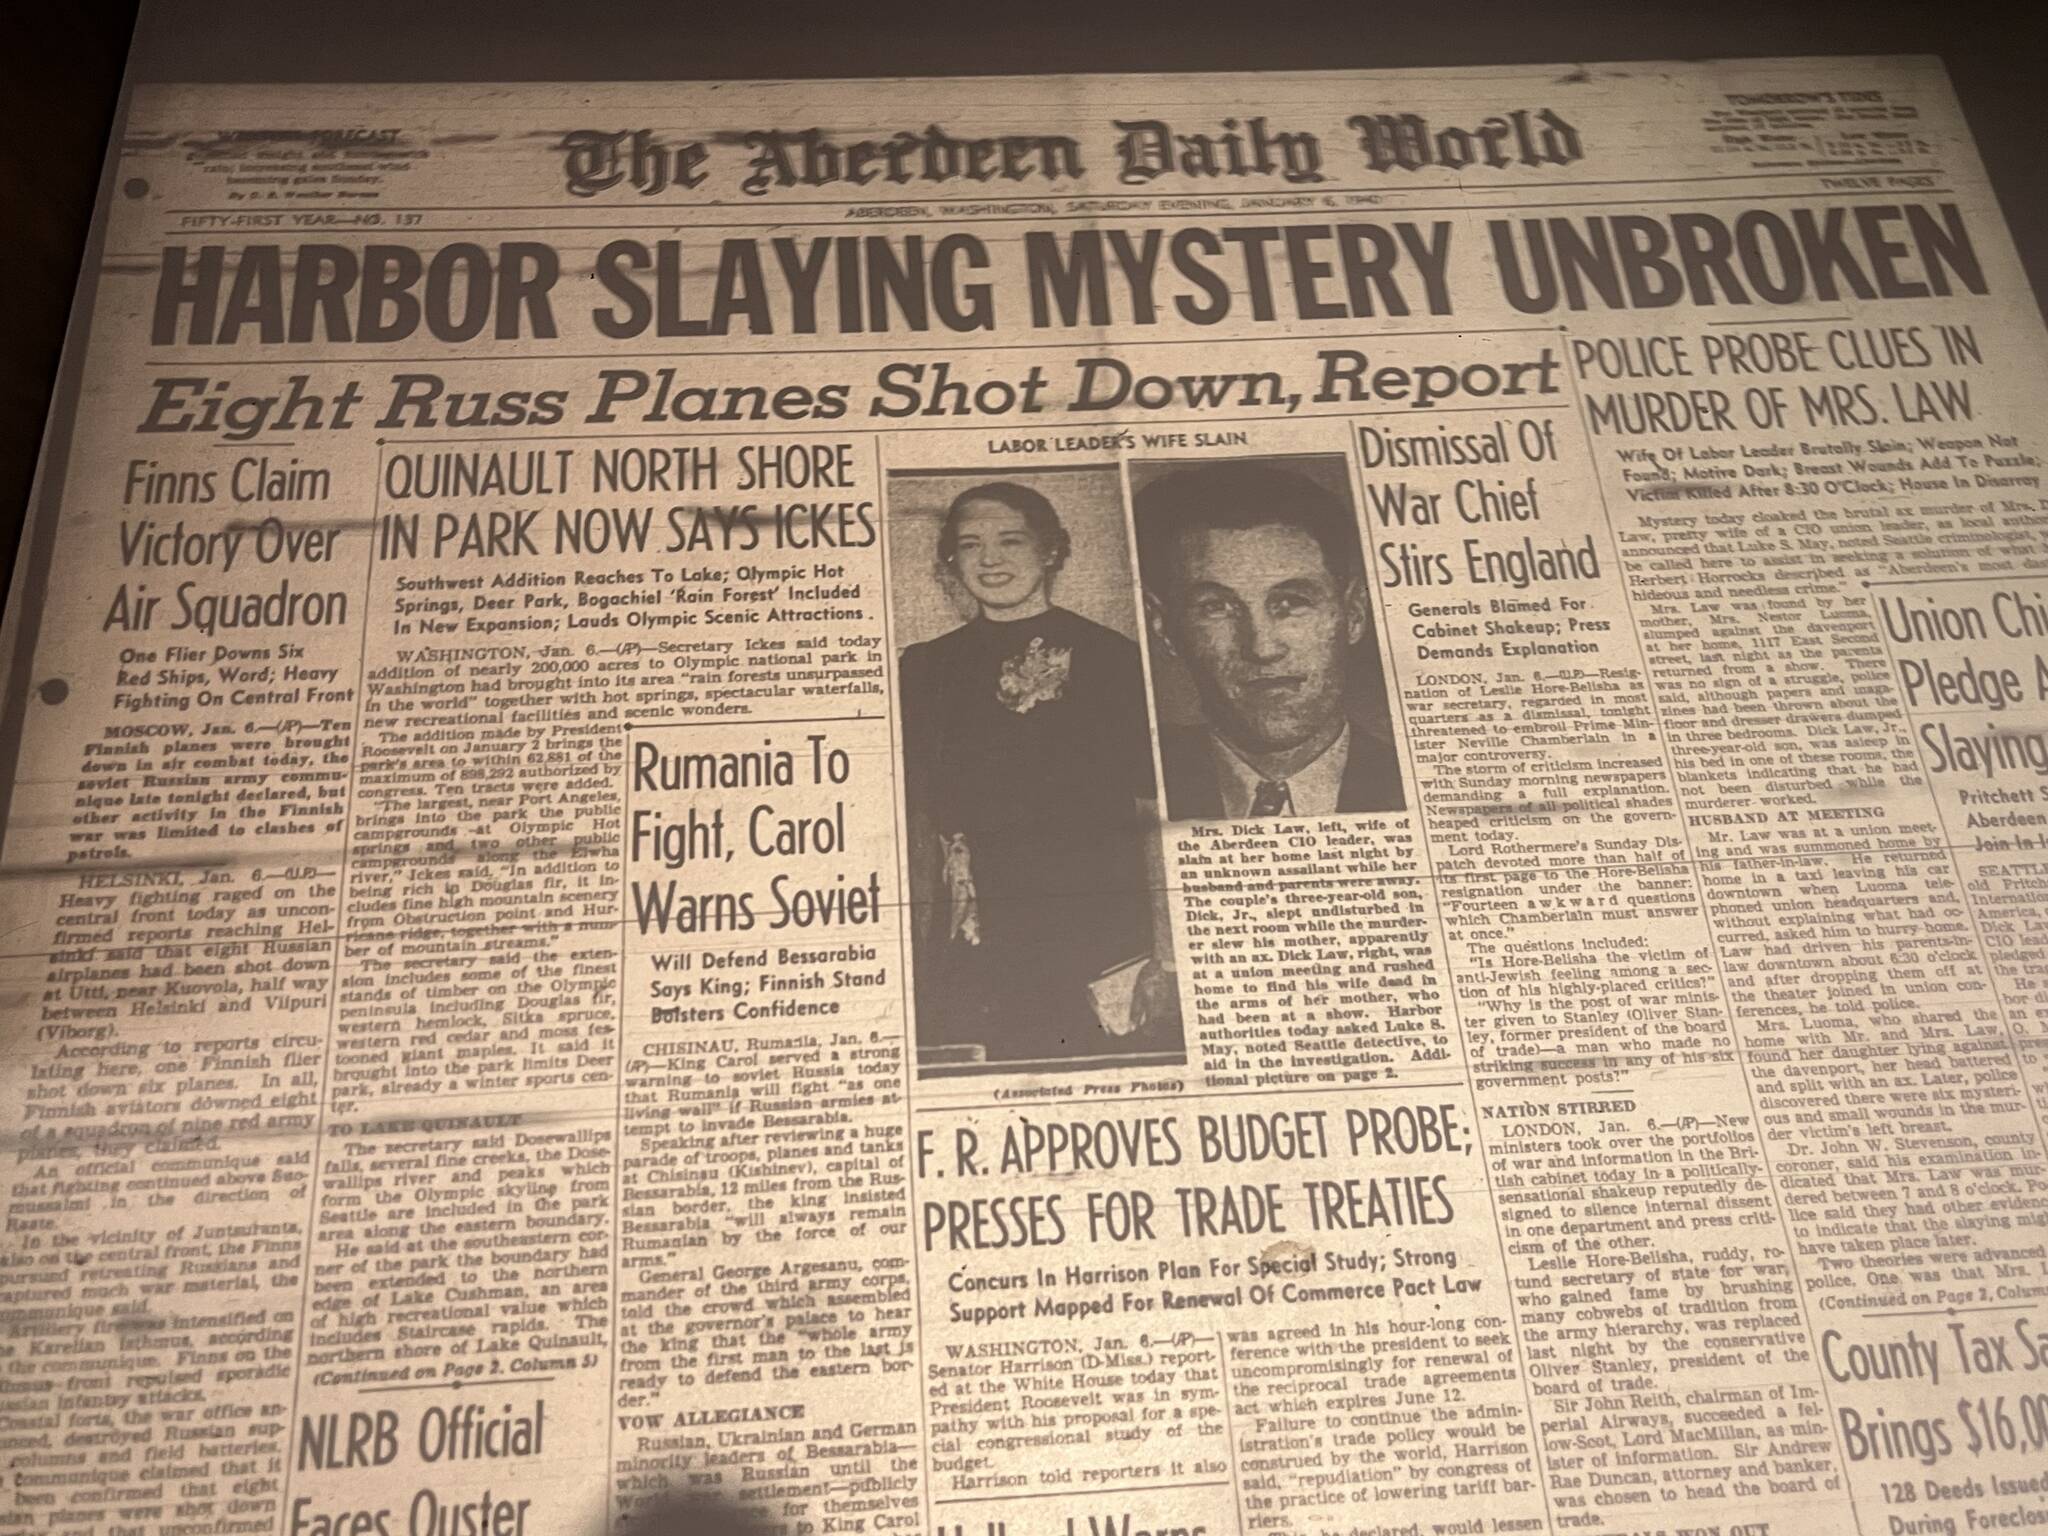 Matthew N. Wells / The Daily World
Microfilm showing the front page headline from Jan. 6, 1940, provides the headline “Harbor Slaying Mystery Unbroken,” which is in reference to the breaking news story about the Jan. 5, 1940 murder of Lea Laura Law. The case is still unsolved. Phil “Fill” Slep spoke respectfully about Law’s place in Aberdeen history recently. Fill, as he’s known, conducts tours of Aberdeen, including the Nirvana Talk, Walk and Ride tours. On Tuesday at 6 p.m., he and others from Downtown Aberdeen Association will host a meeting at the D&R Event Center for the public to share their input for a spooky Oct. 21 event called “Billy’s Back: Walk of the Undead.”